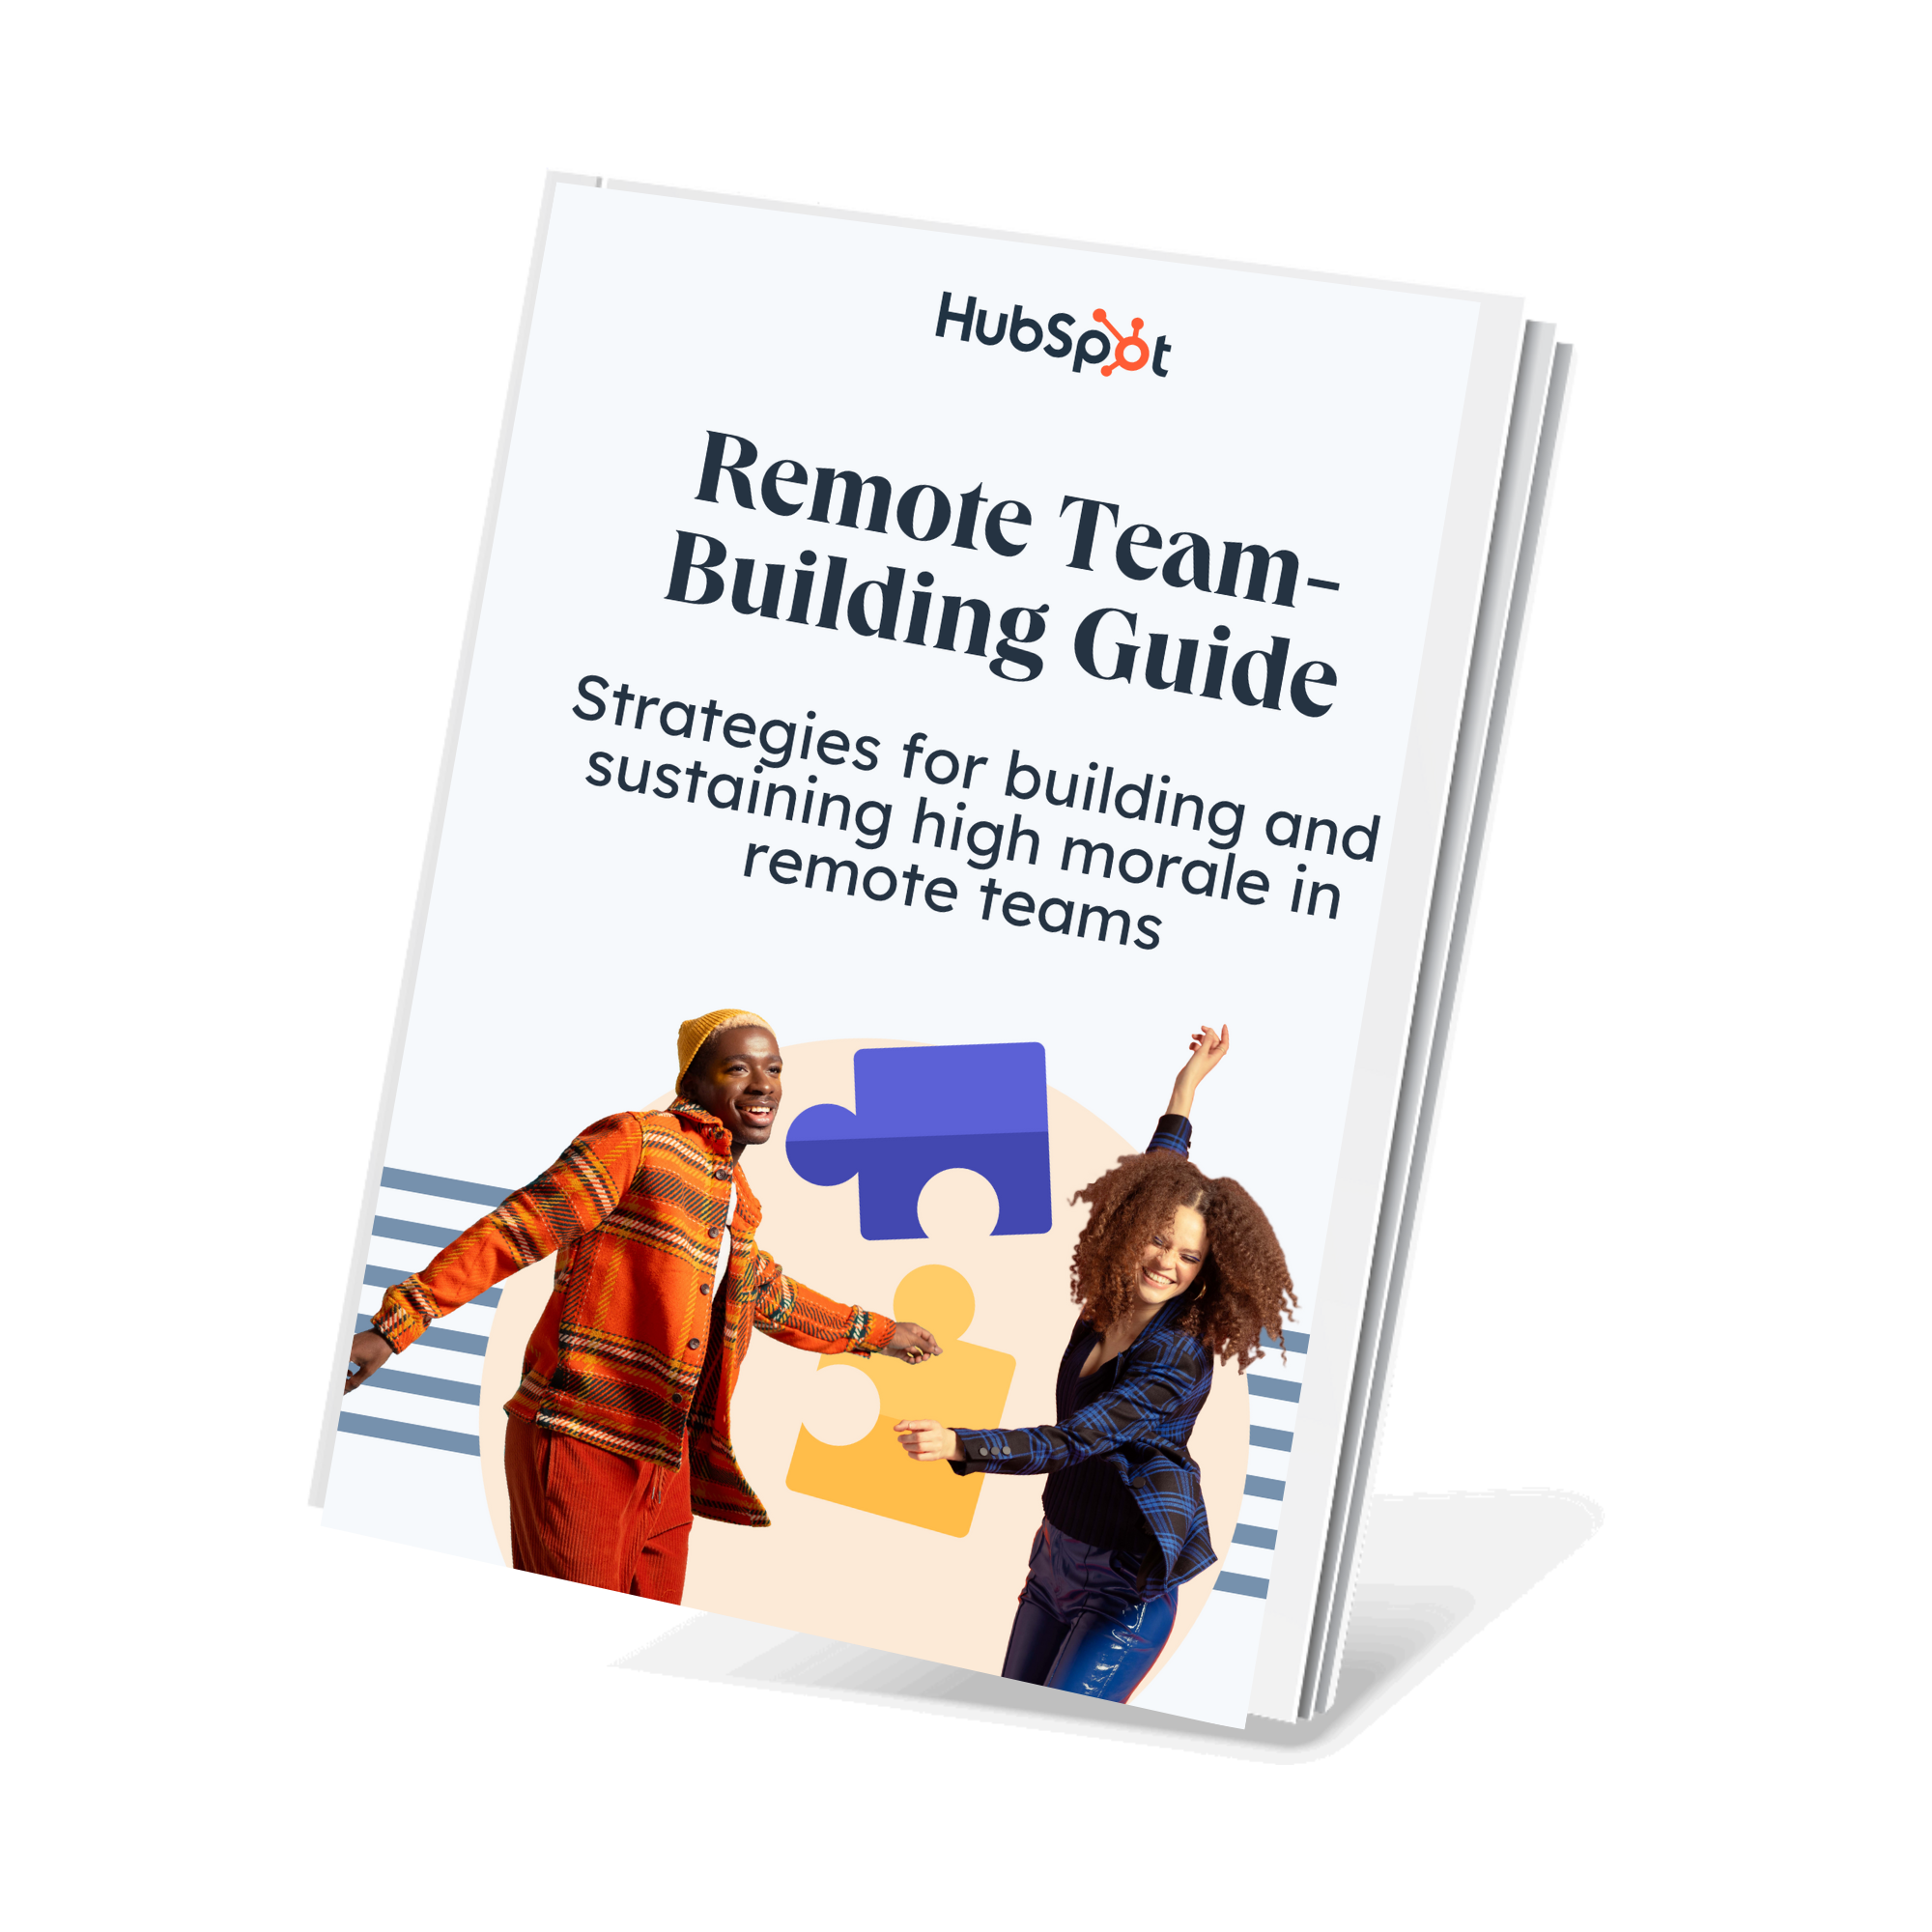 50 Team Building Activities for Work Your Team Will Love (2023)